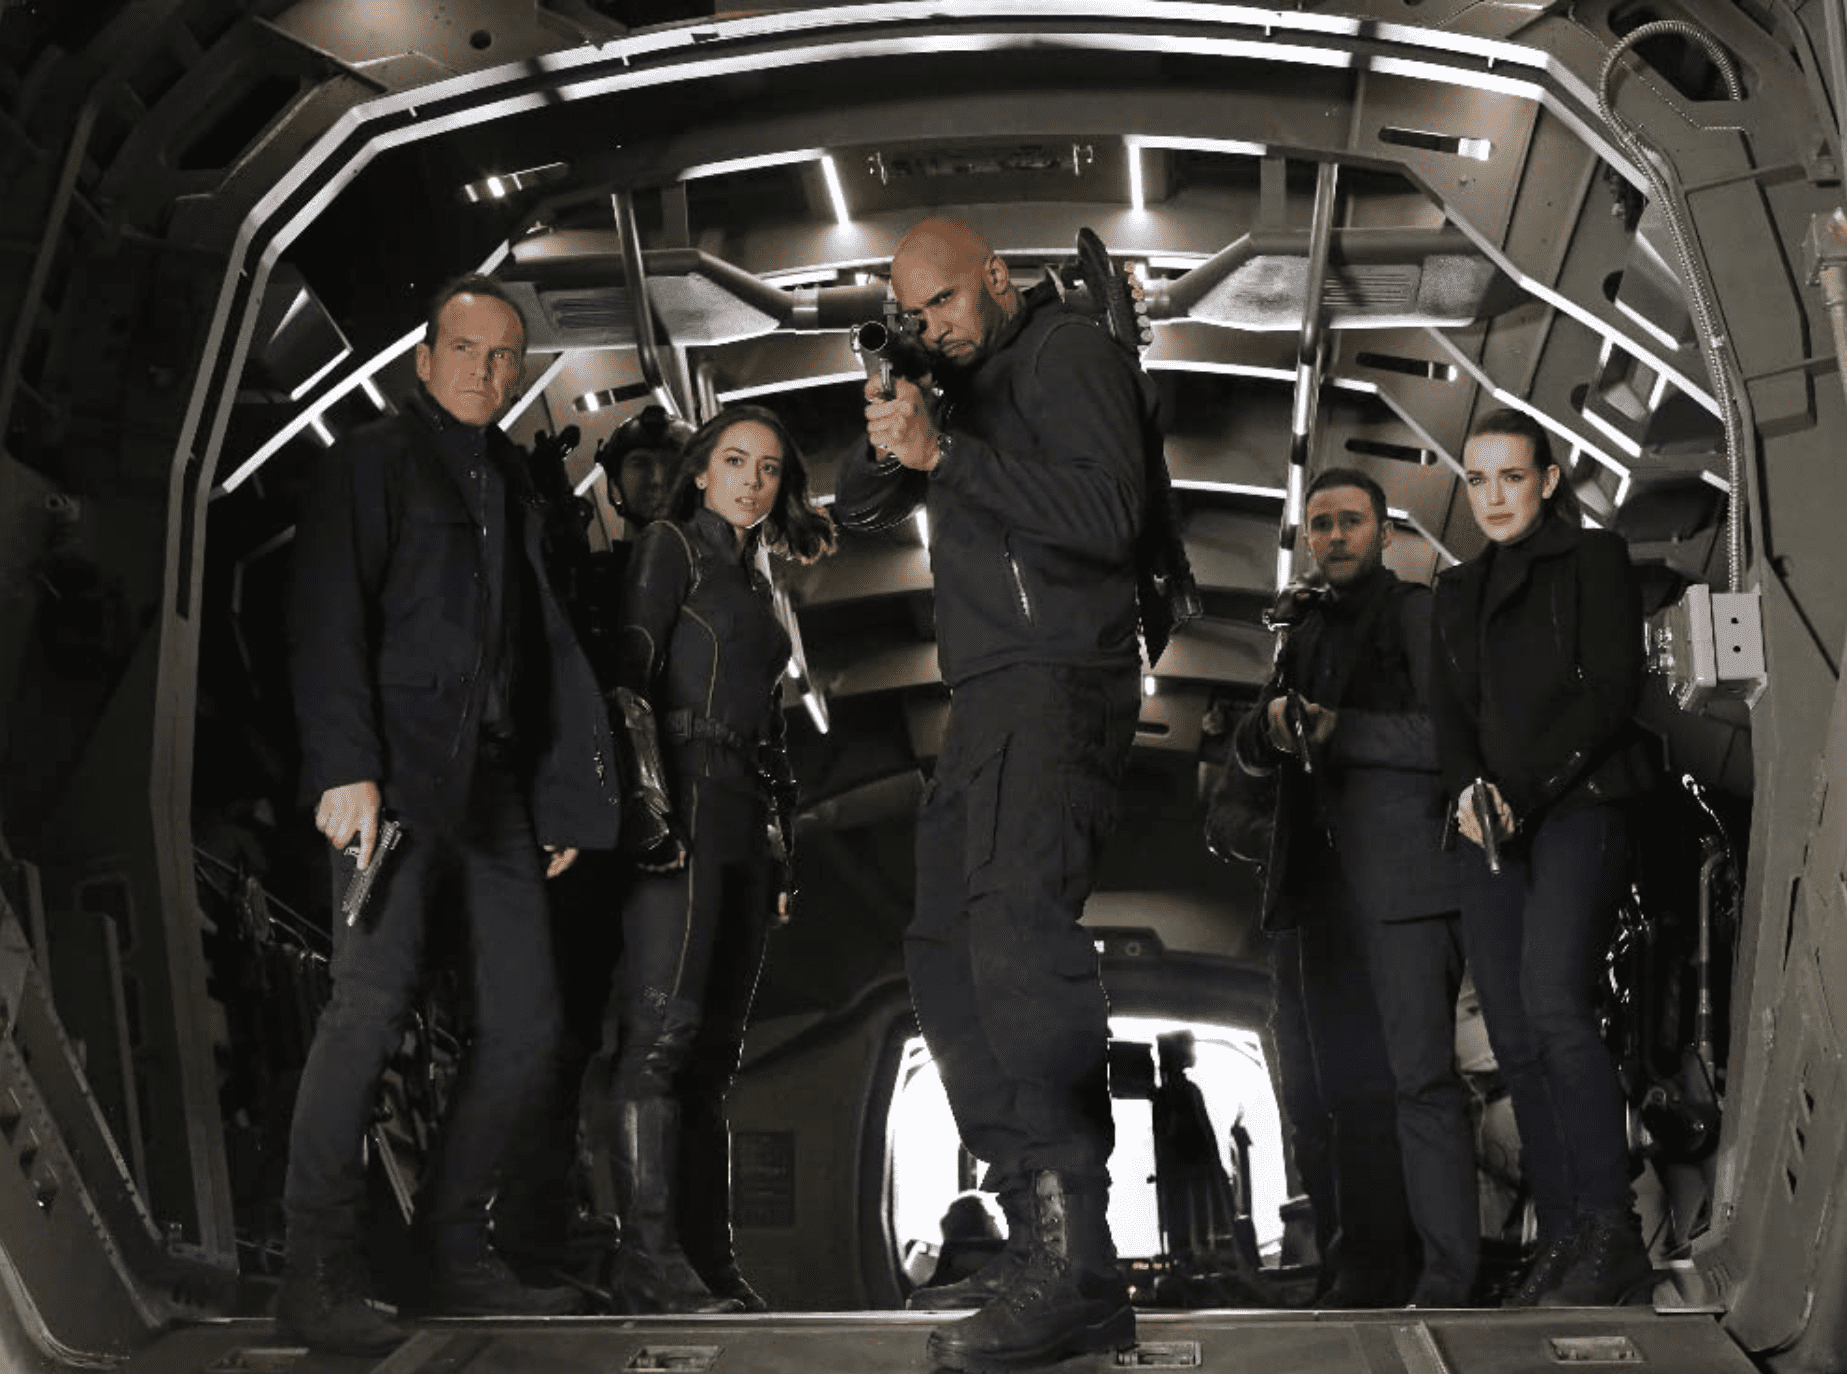 S.H.I.E.L.D. standing in an airplane while waiting for battle